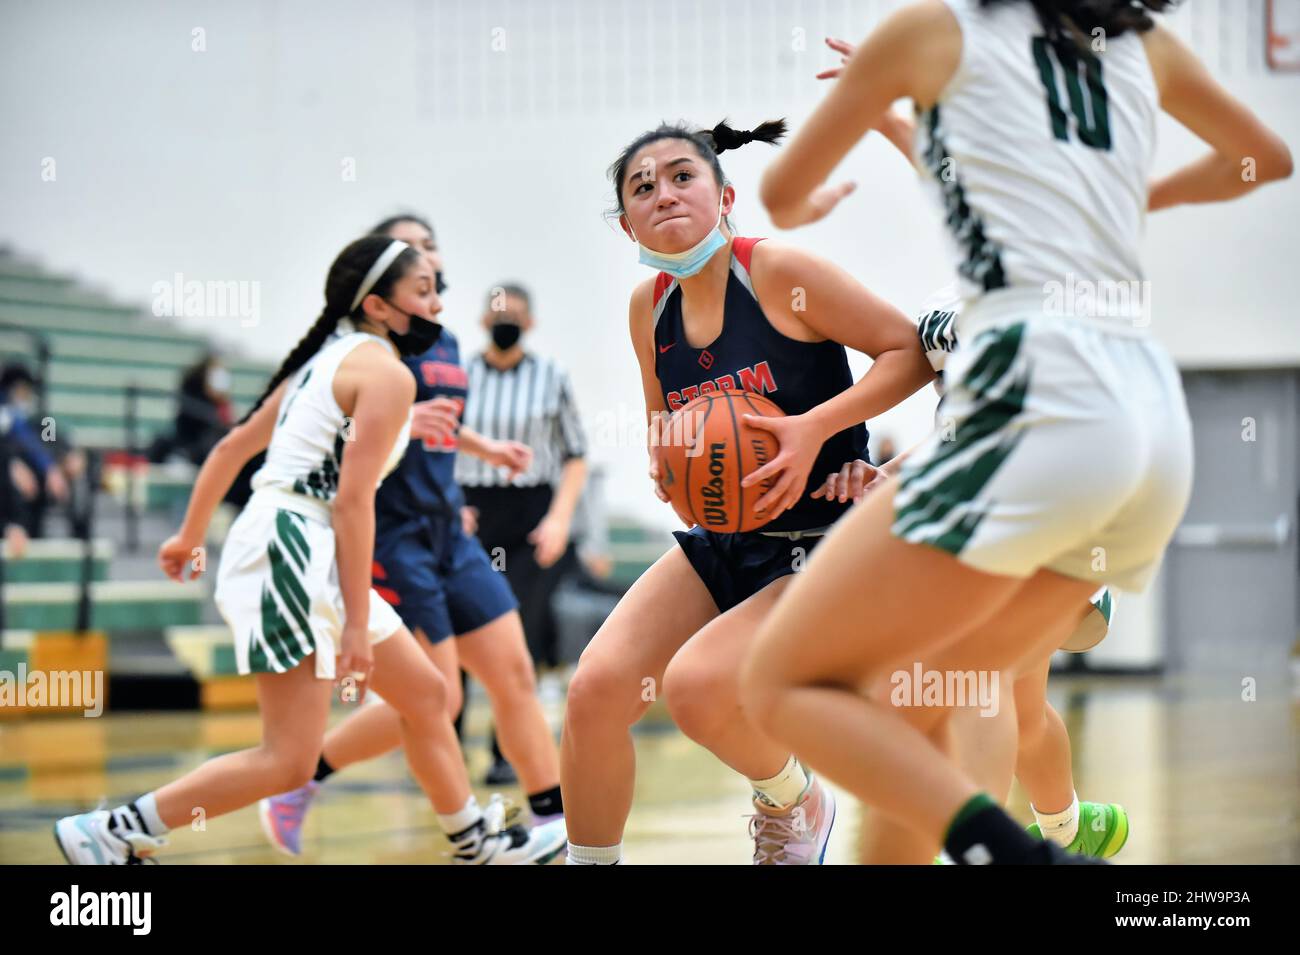 USA. Player driving on the basket while eyeing the hoop. Stock Photo